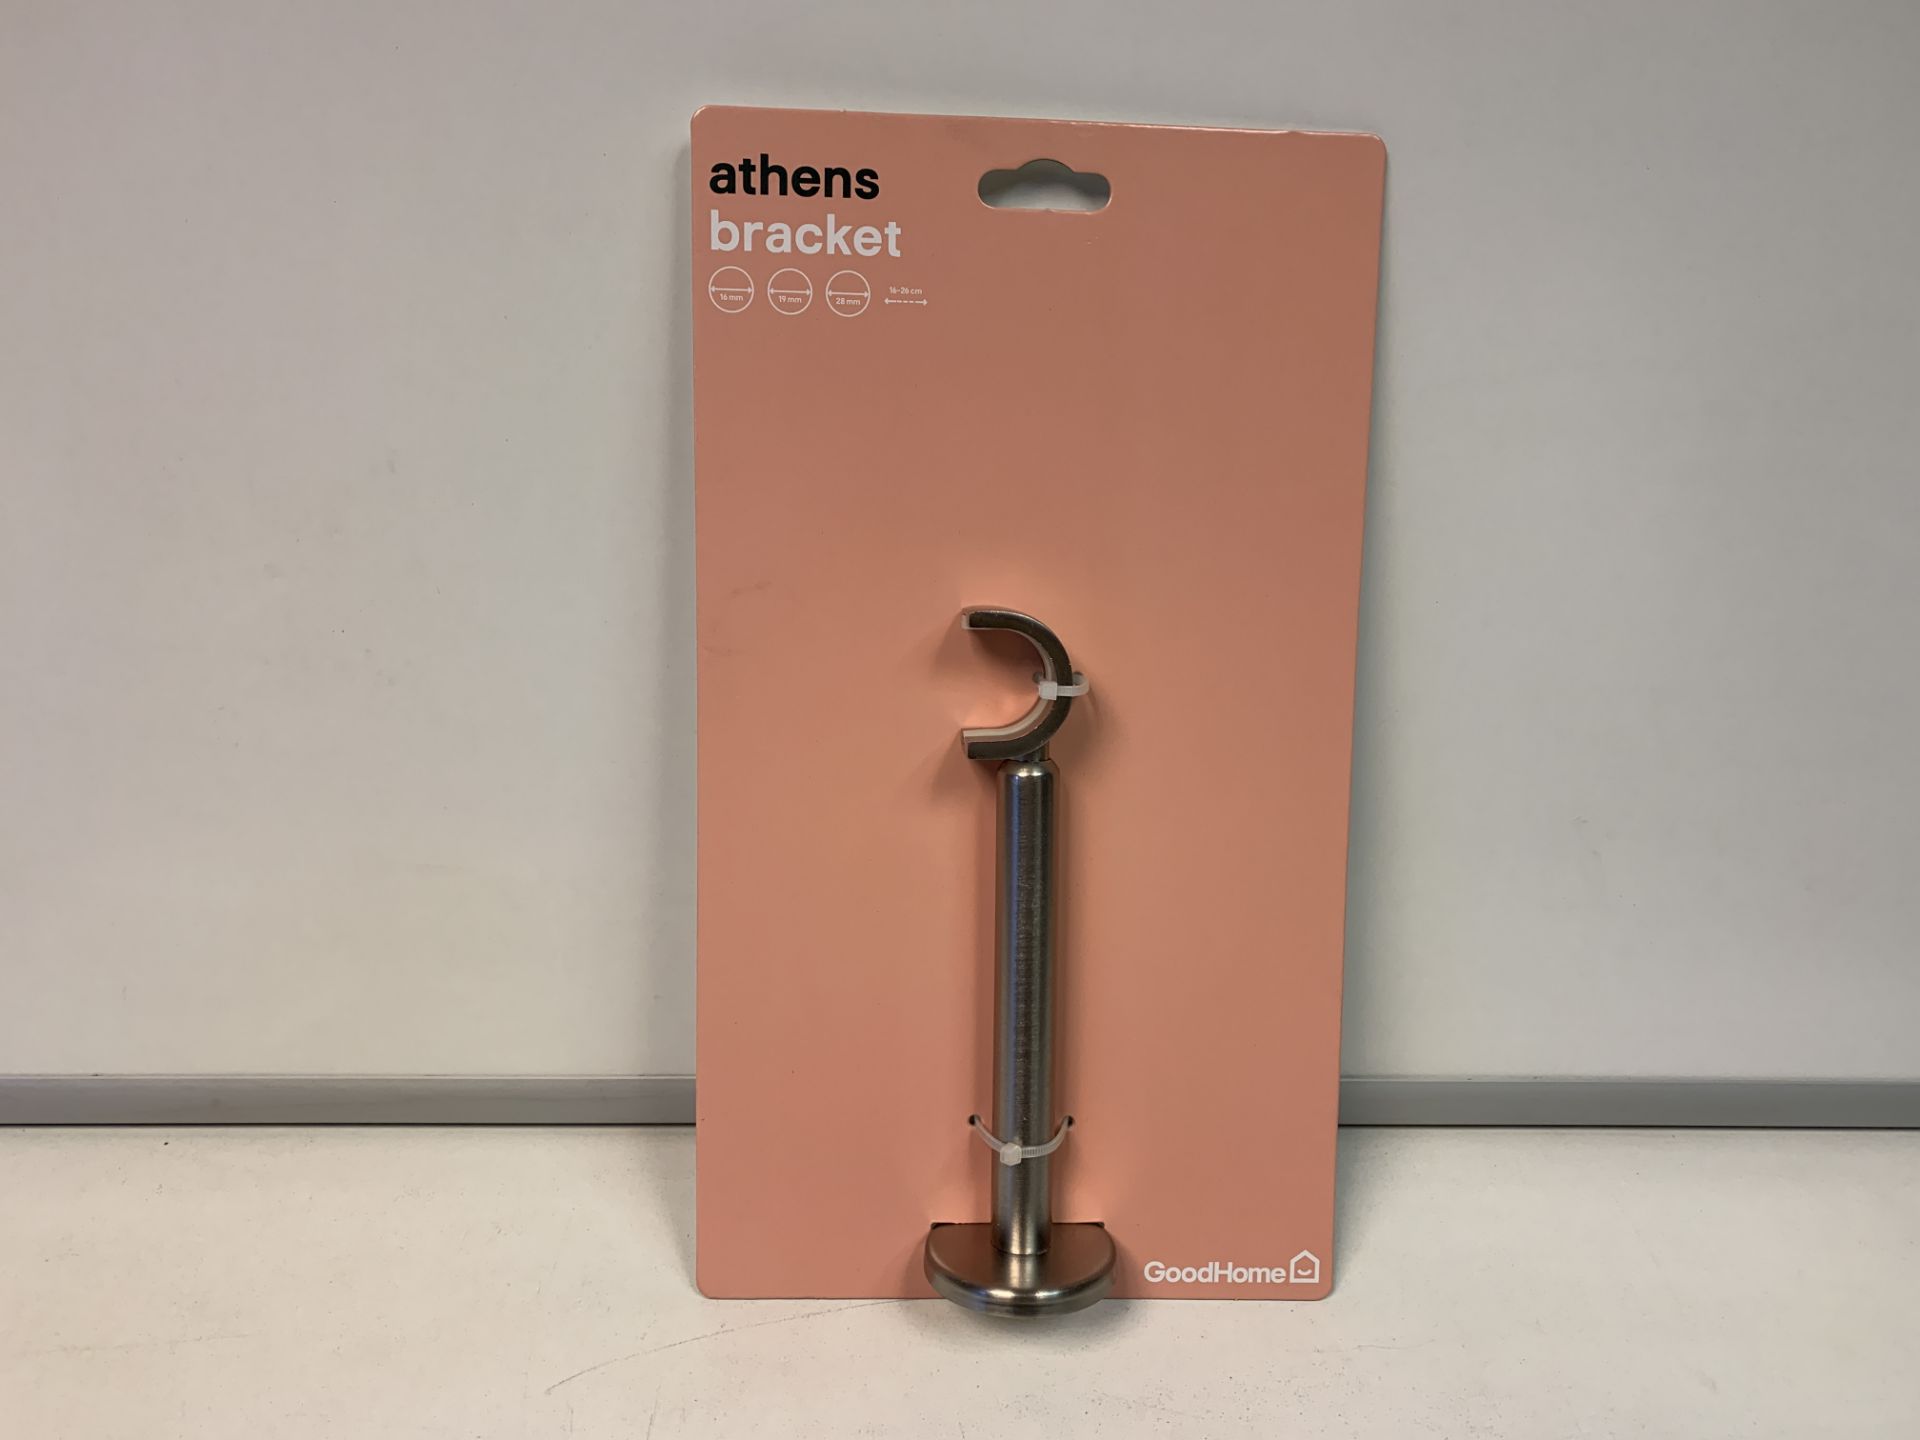 140 X NEW PACKAGED ATHENS BRUSHED NICKEL EXTENDABLE BRACKET FOR CURTAIN POLES (ROW6). RRP £12 EACH